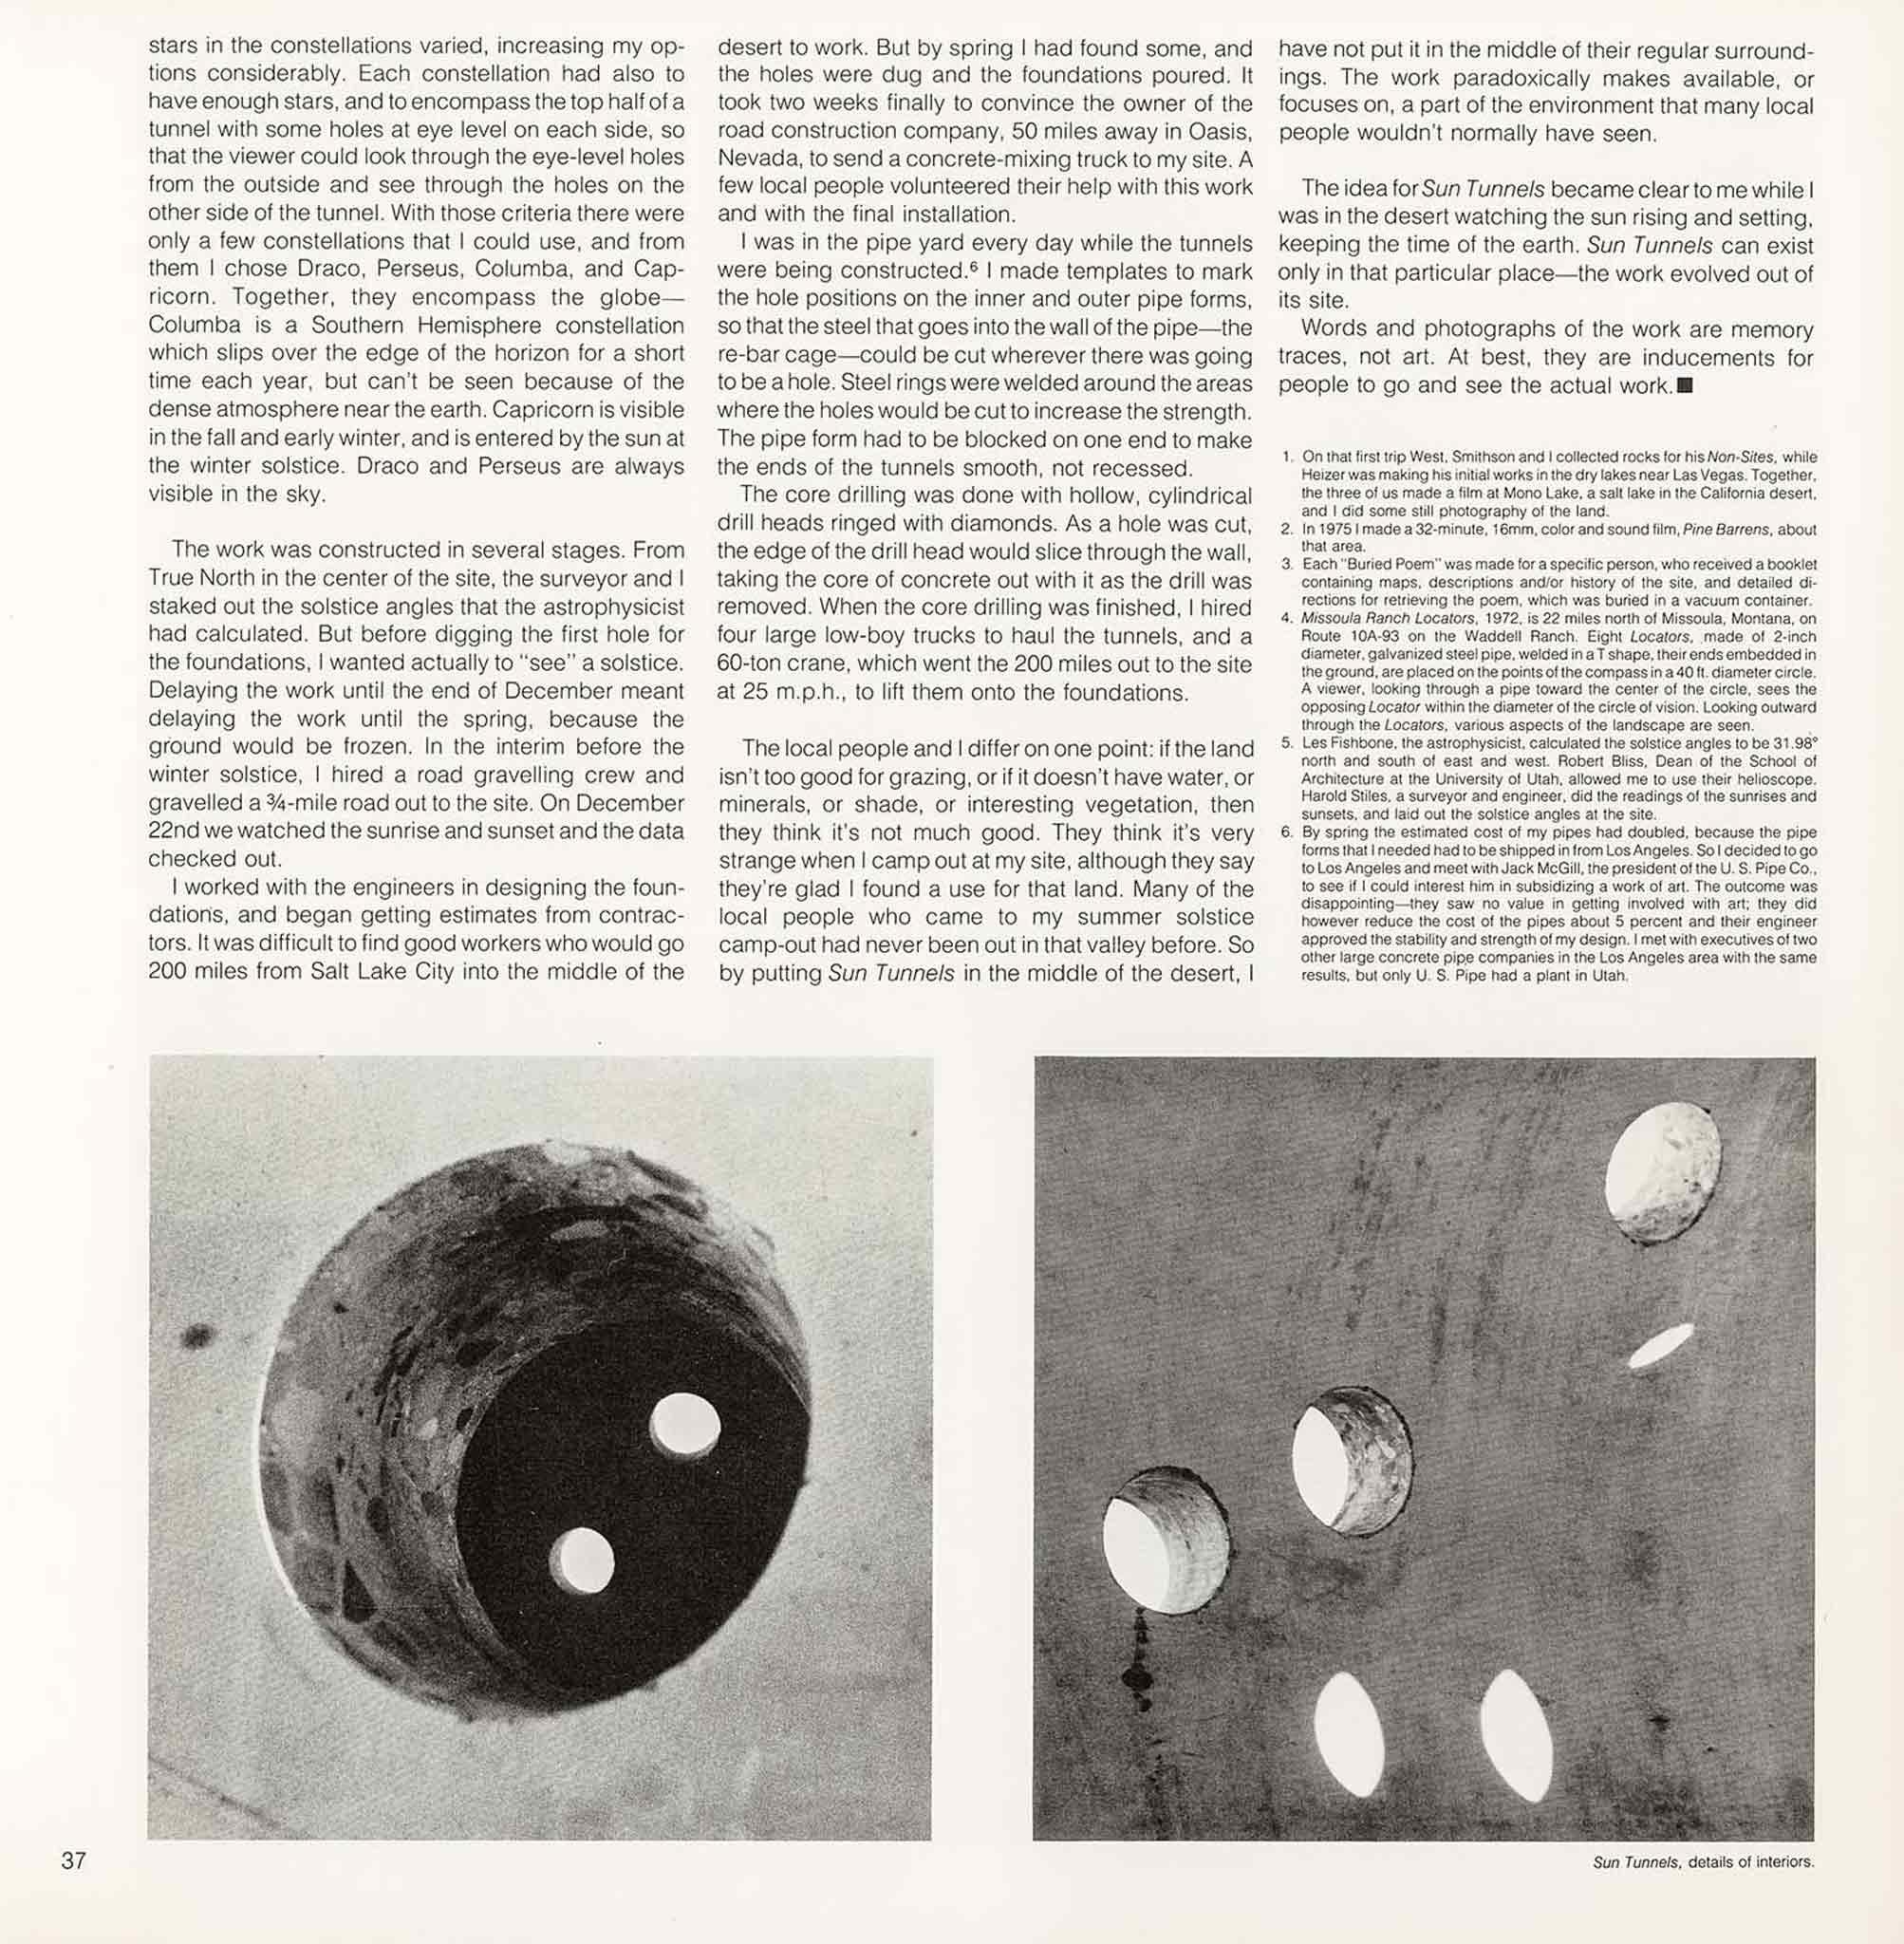 Magazine layout with text at the top and two images side by side at the bottom.  Images are details of circular holes bored through concrete.